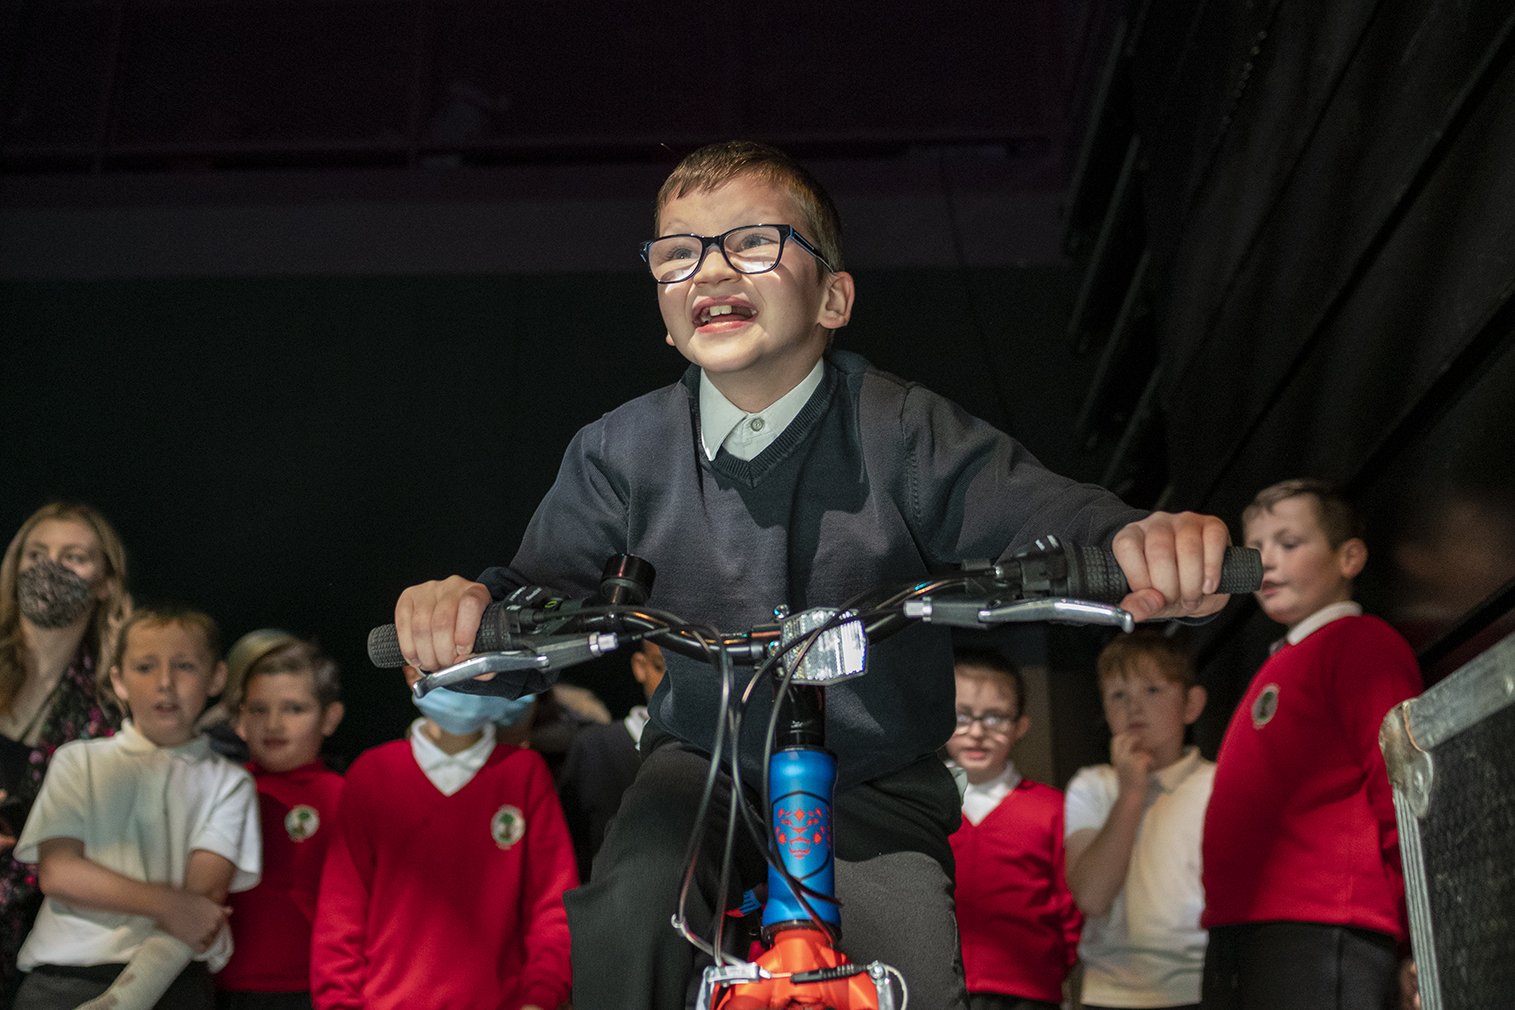  Pupil cycling a bike with his classmates behind him 